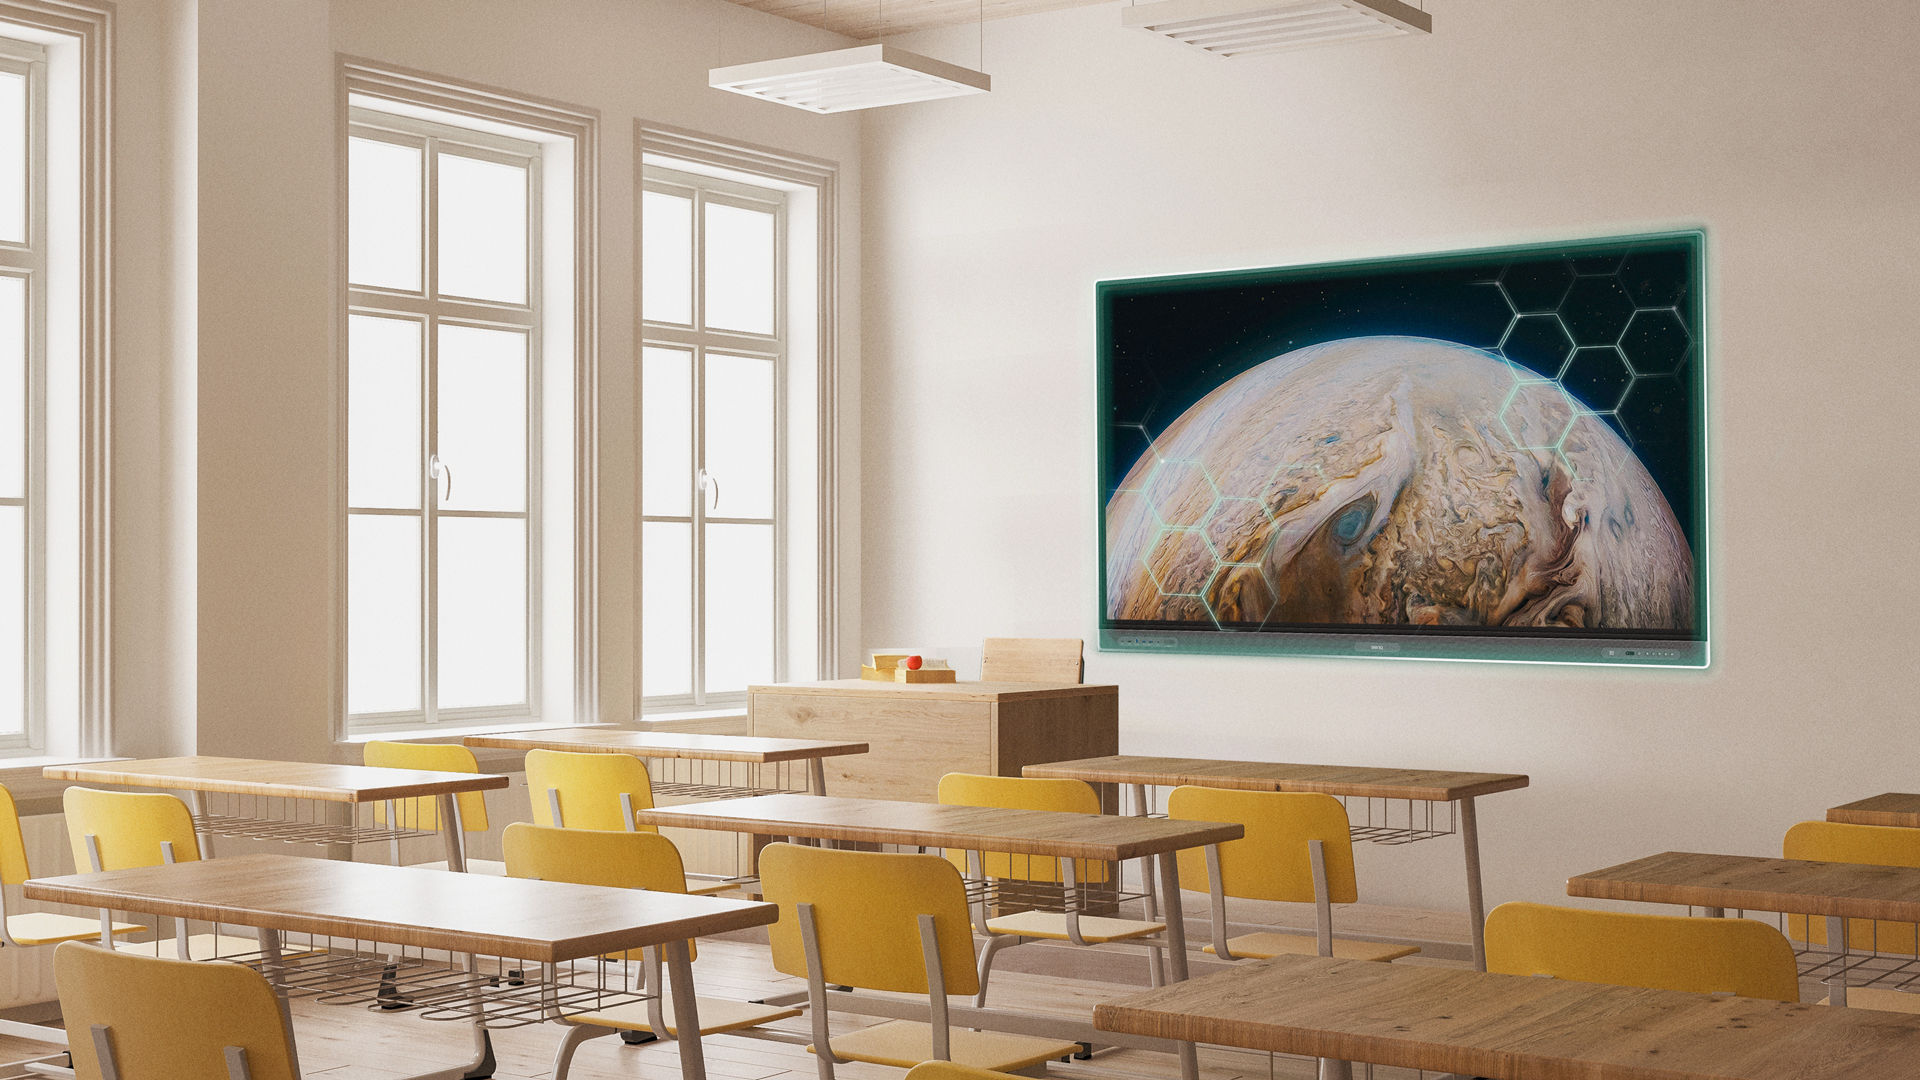 BenQ Interactive Panel Professional Series 75" (RP7503) Germ-resistant Pro Series RP03 screen in a bright, empty classroom